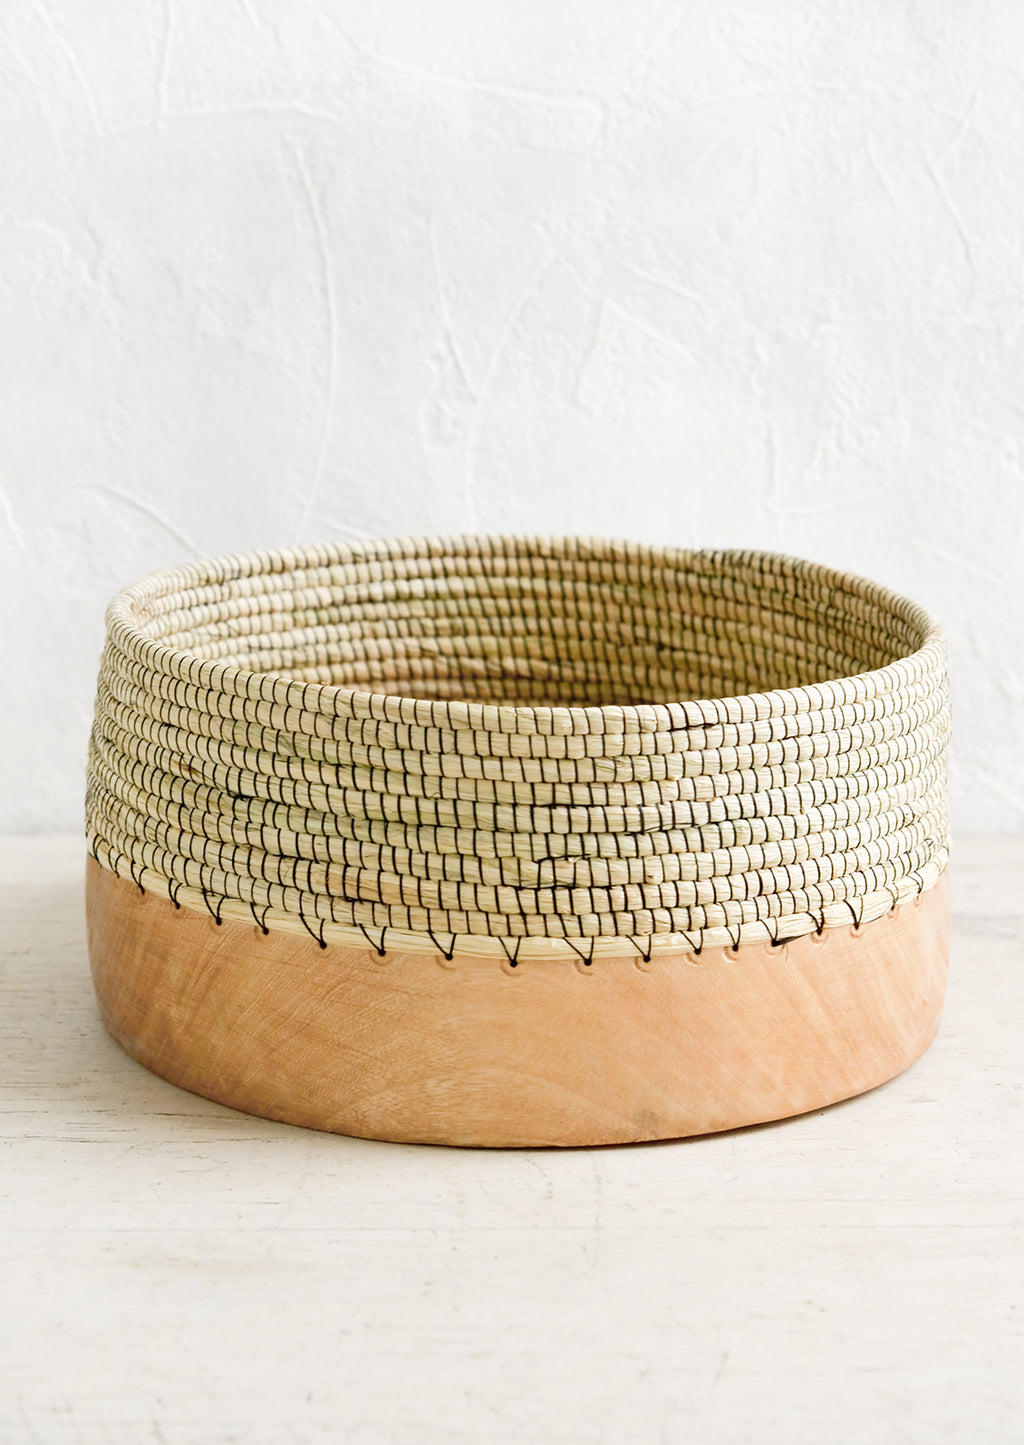 Large: A wide, shallow bowl made from half wood and half woven grass with black thread.